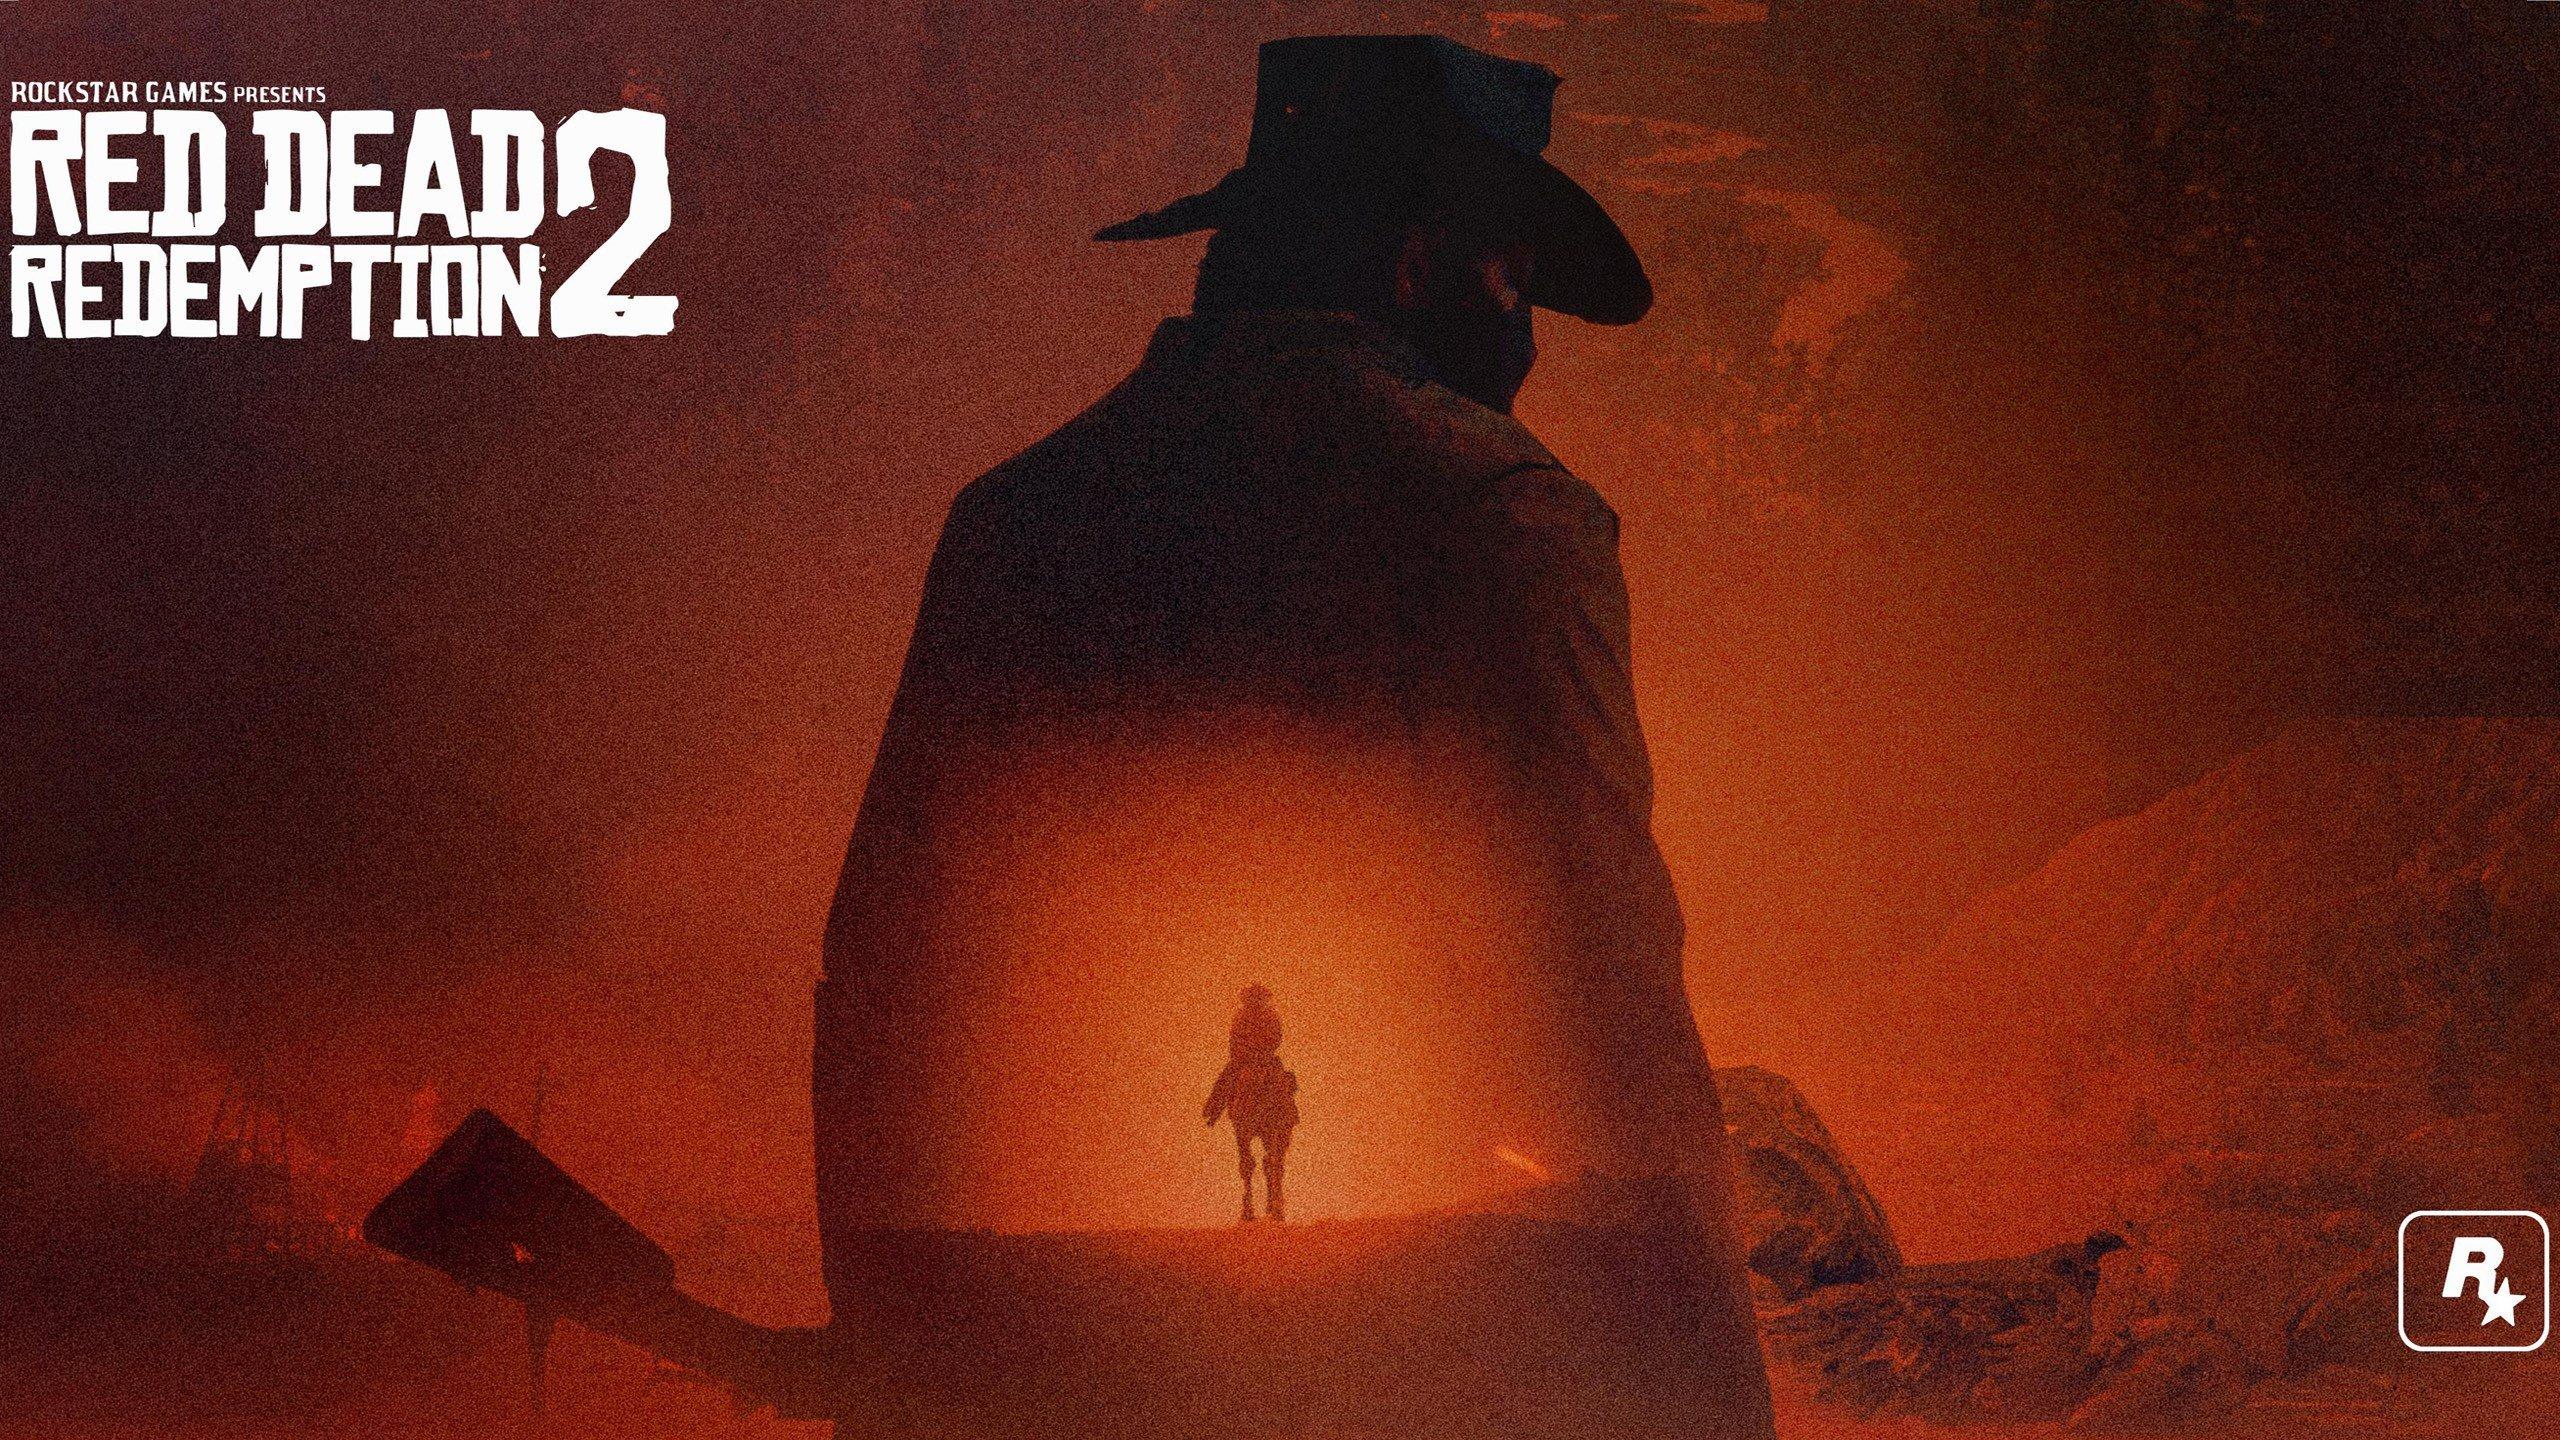 2560 x 1440 · jpeg - Red Dead Redemption 2 HD Wallpapers - Wallpaper Cave